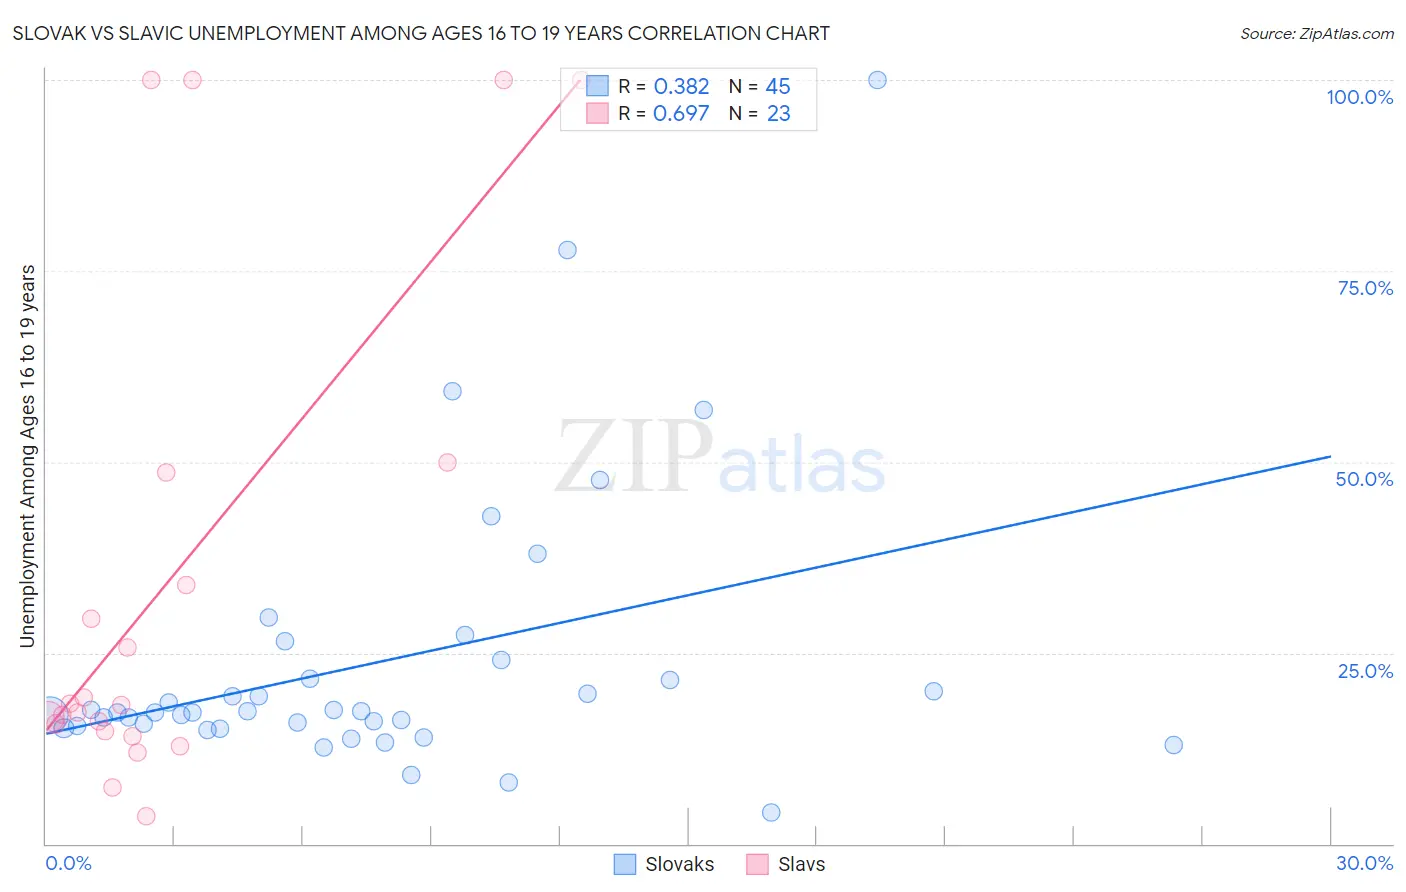 Slovak vs Slavic Unemployment Among Ages 16 to 19 years